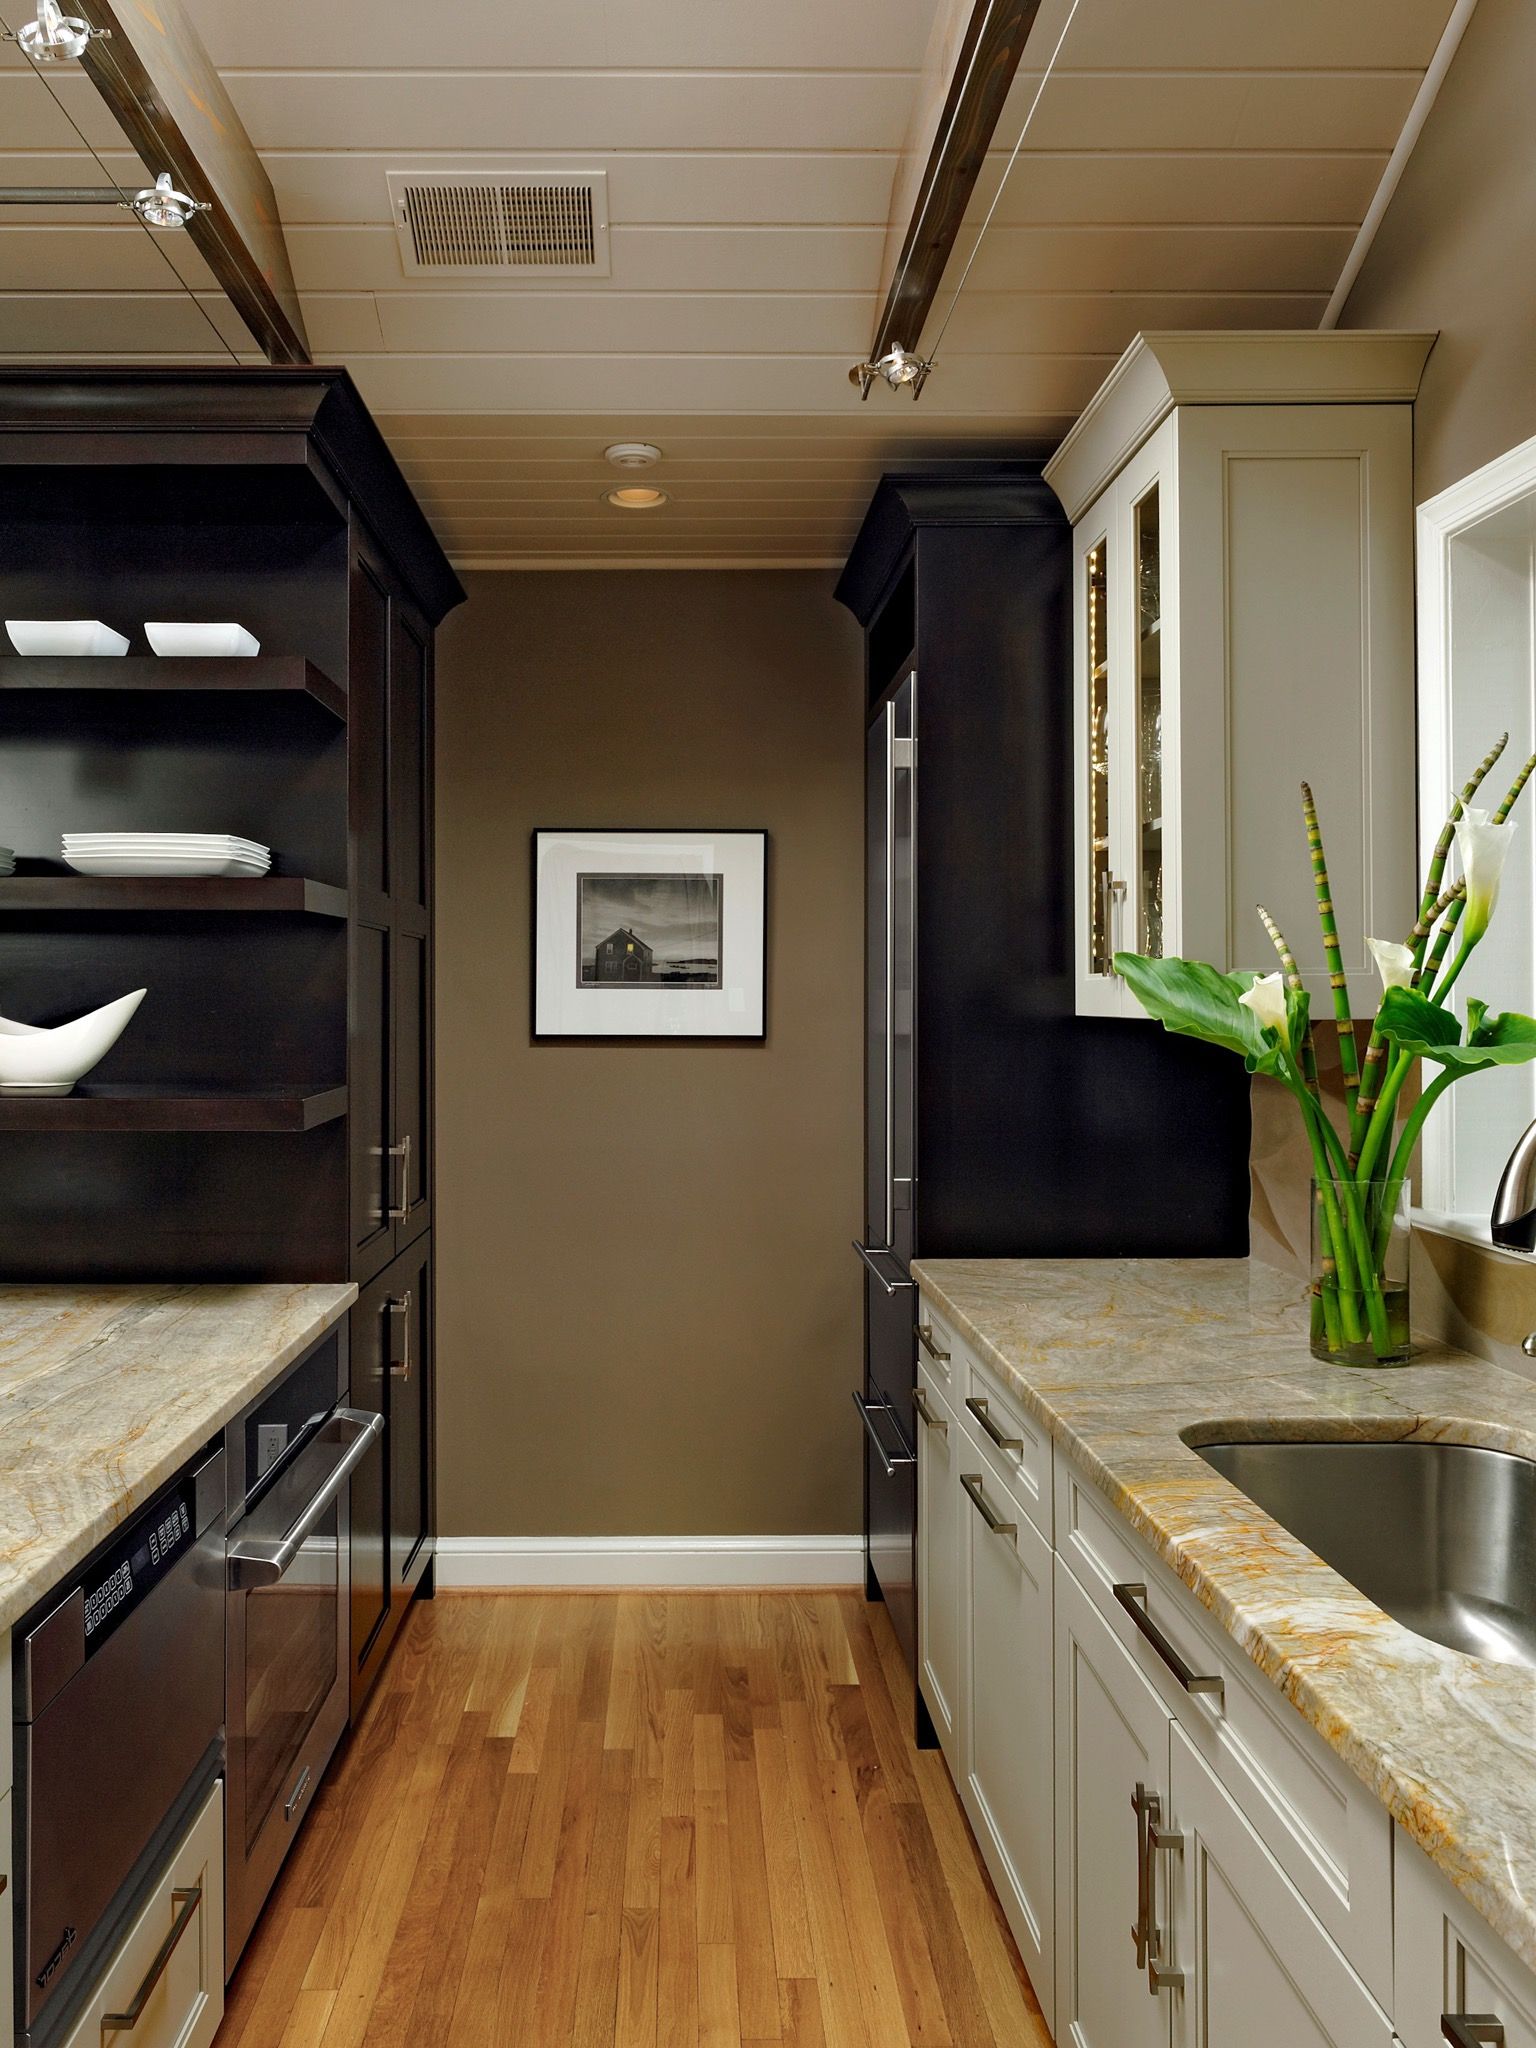 Long And Narrow Kitchen Design With With Open Shelving Storage (View 1 of 10)